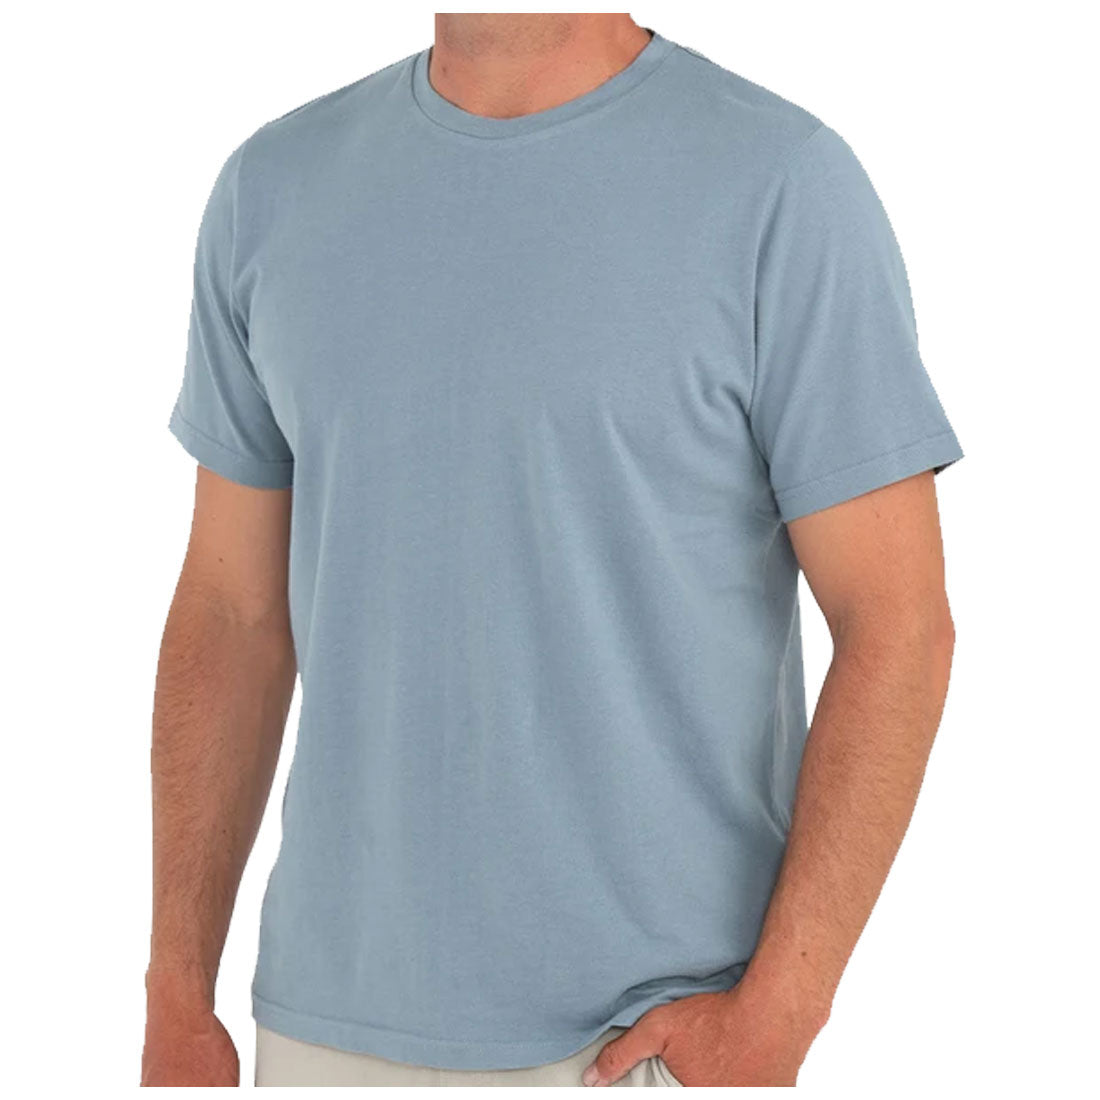 Free Fly Bamboo Heritage Tee - Men's